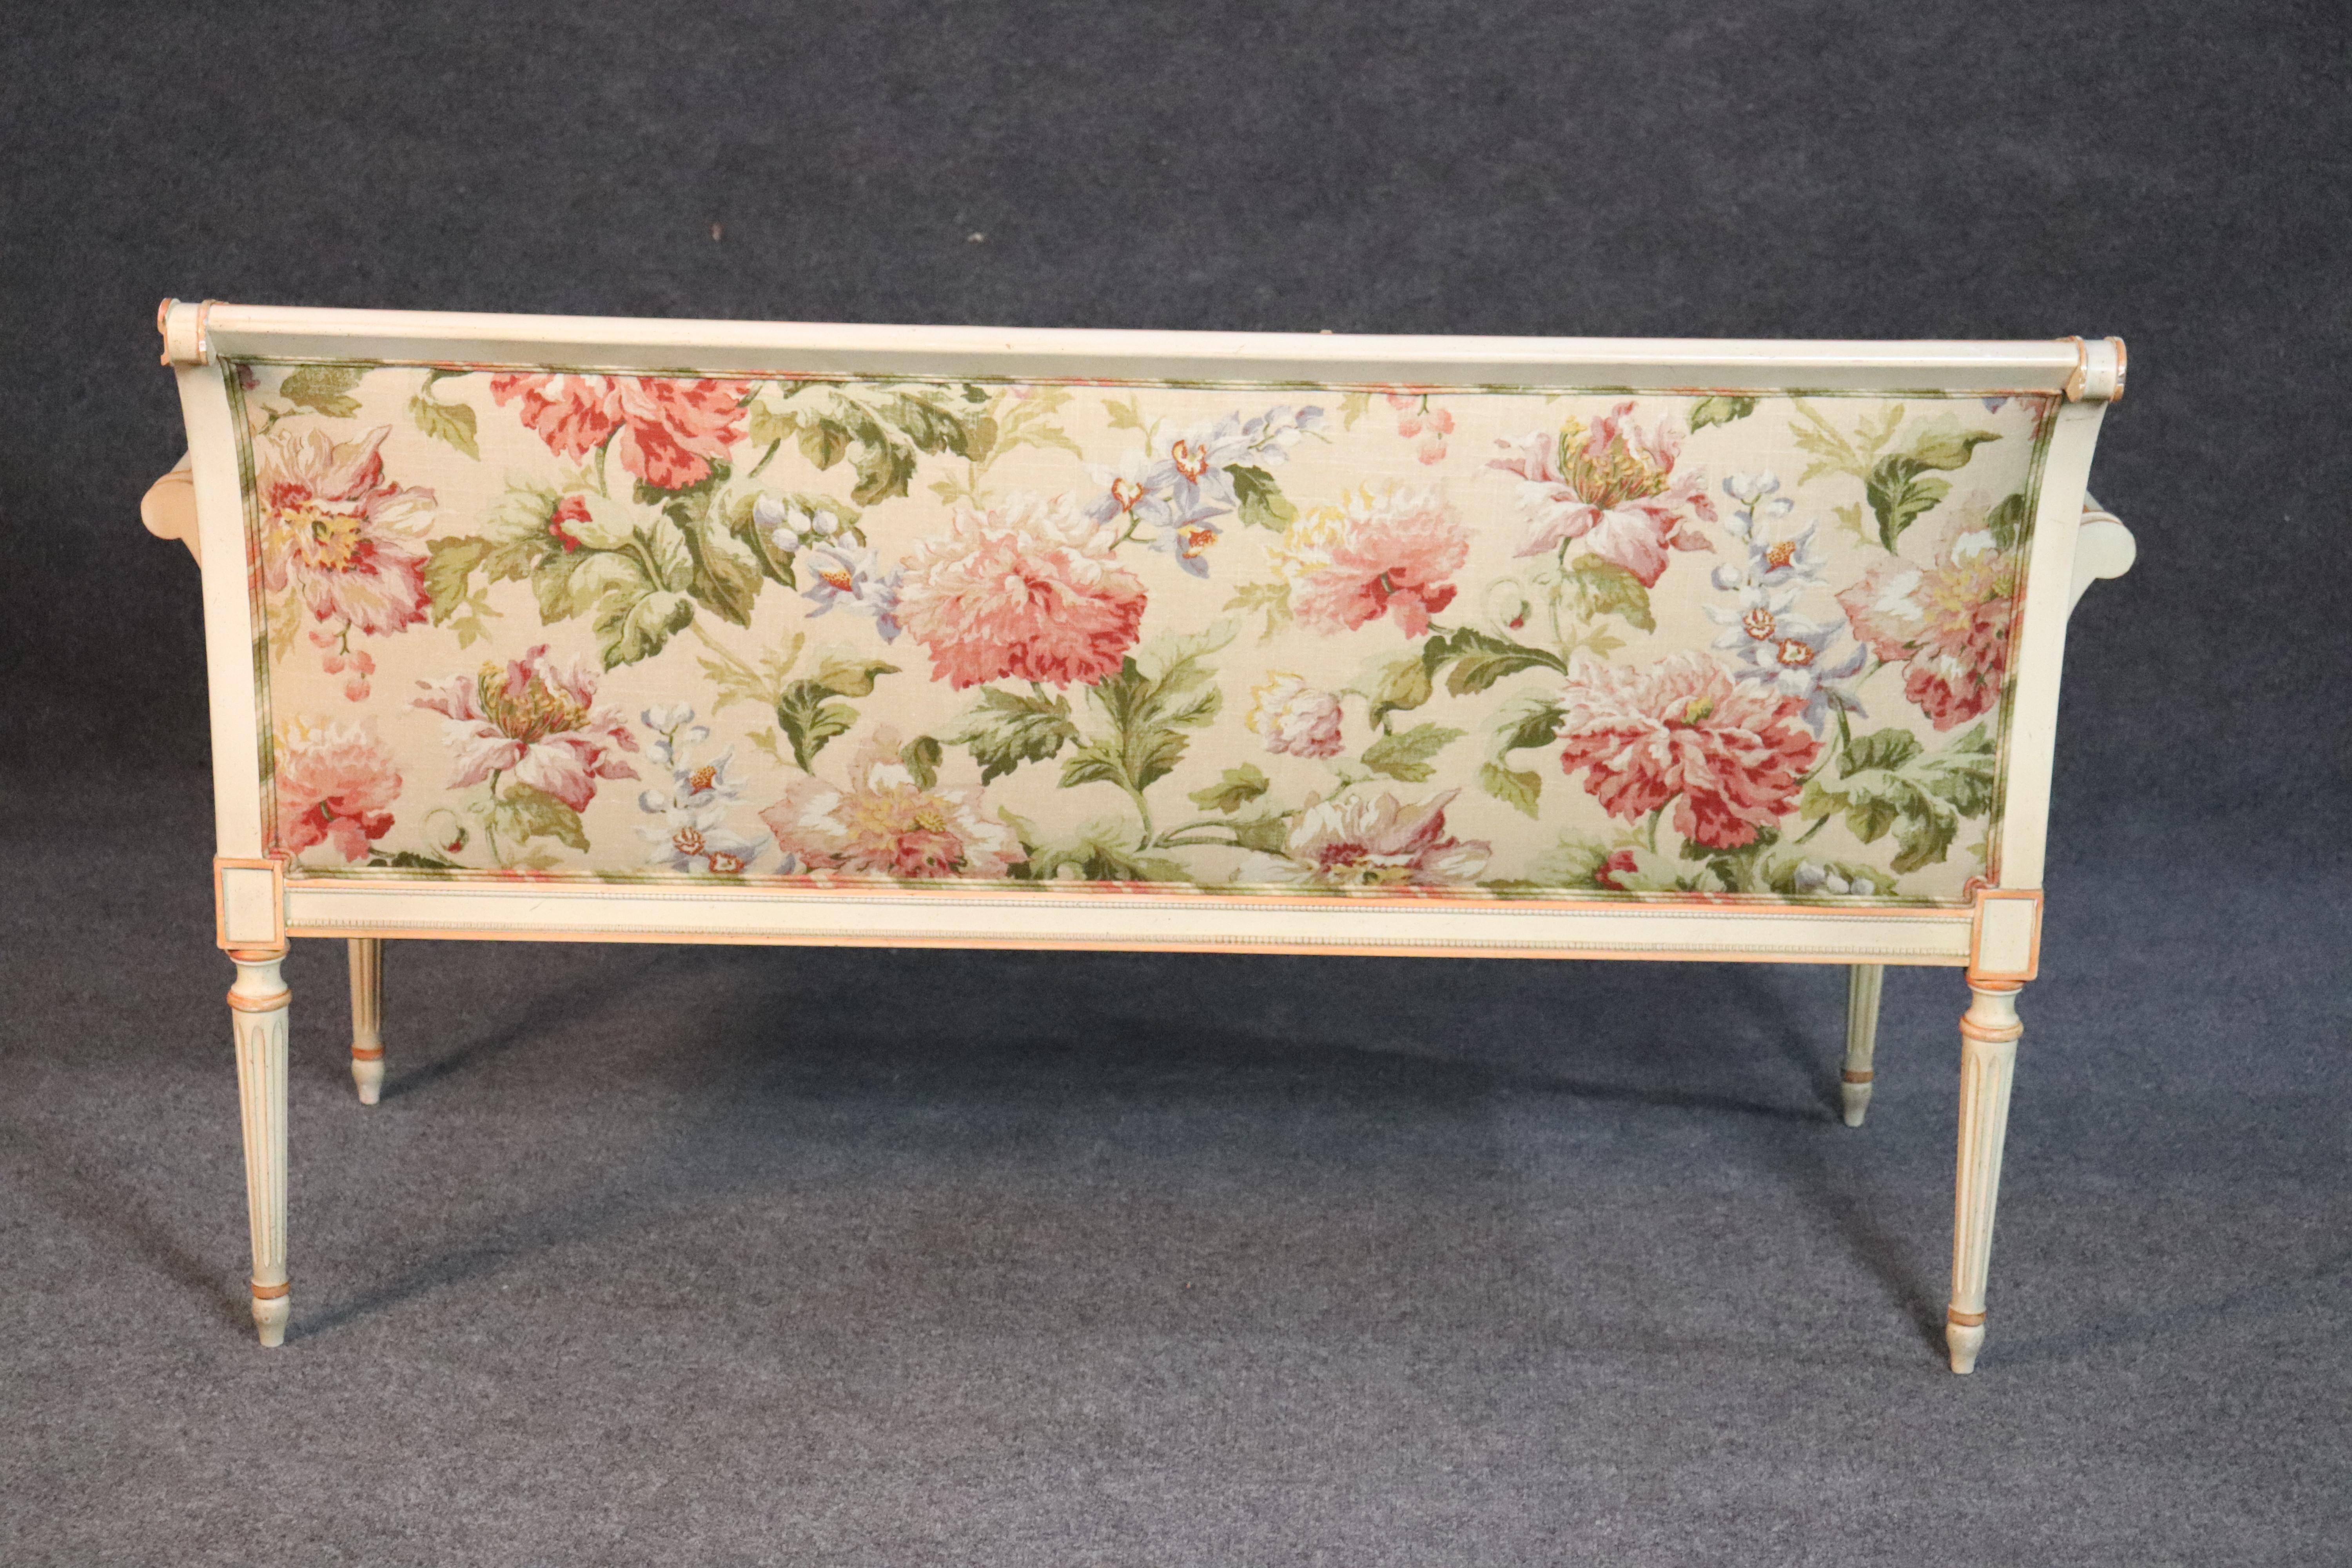 20th Century French Louis XVI Crème Painted Settee with Linen Upholstery